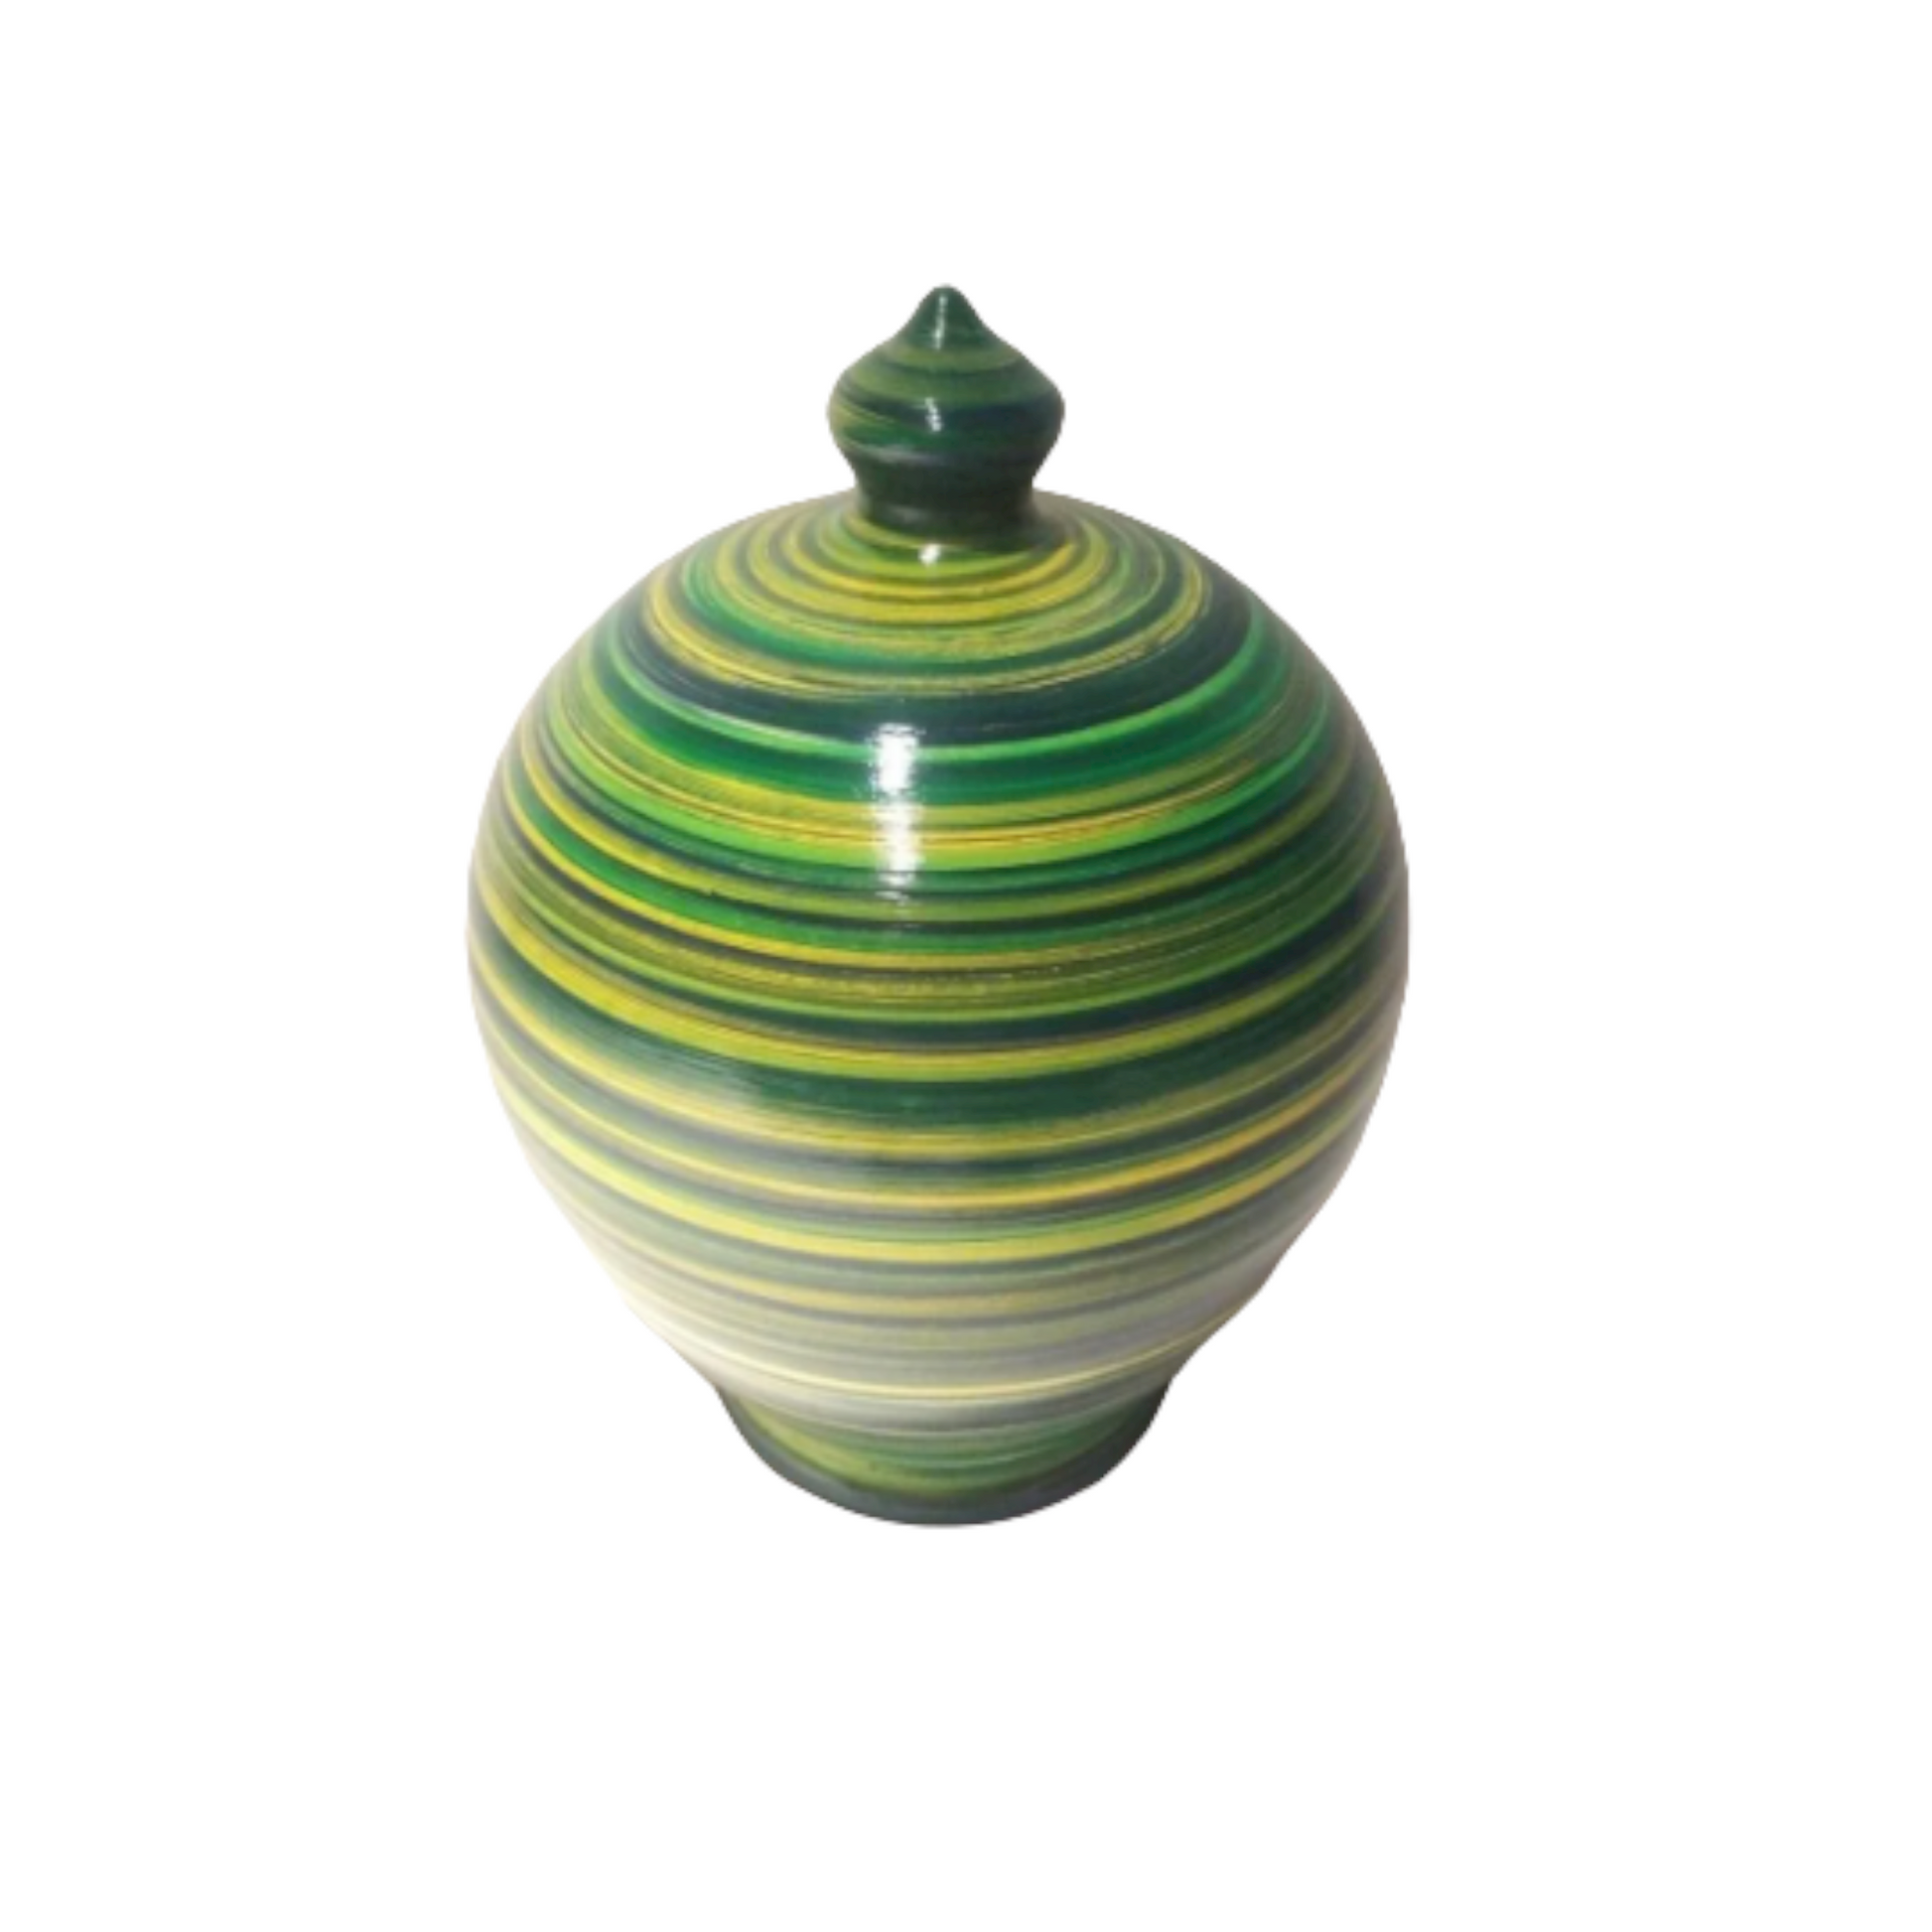 Handmade in Italy, the ideal gift for piggy bank lovers both kids and adults! Colors: Yellow, Blue and Green. 💰Size: 15 cm = 5.90 inches in height. Circumference: 40 cm = 15.74 inches. With hole and stopper plug, or without hole.